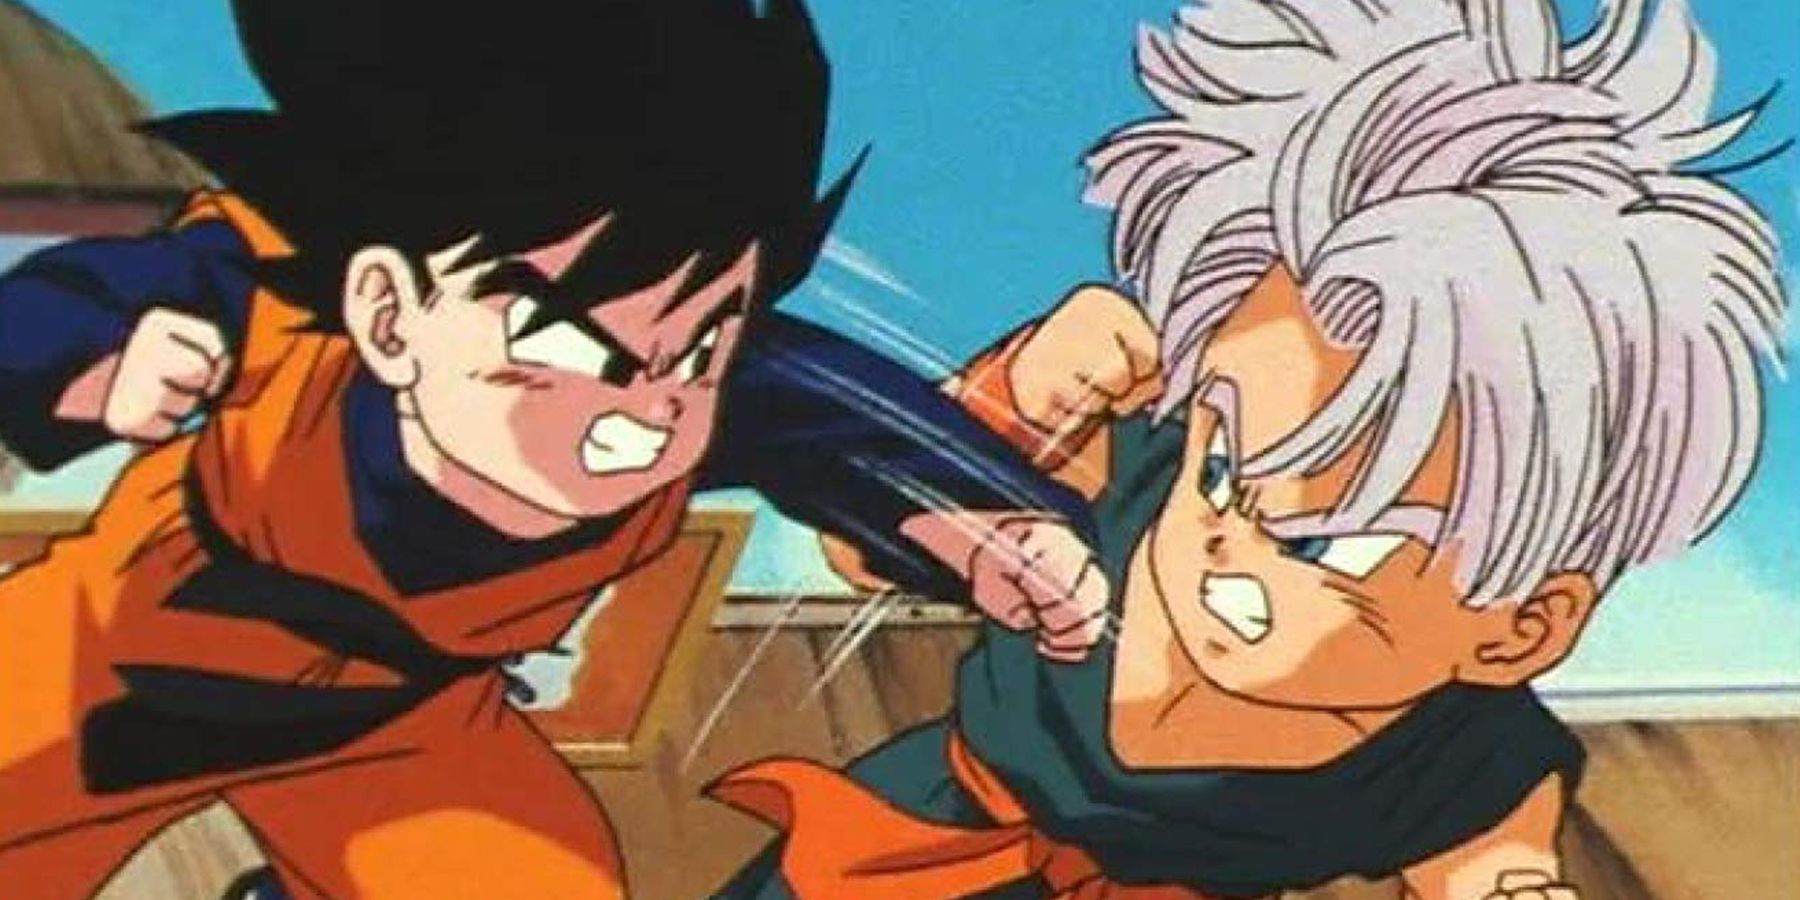 how old was trunks in the tournament